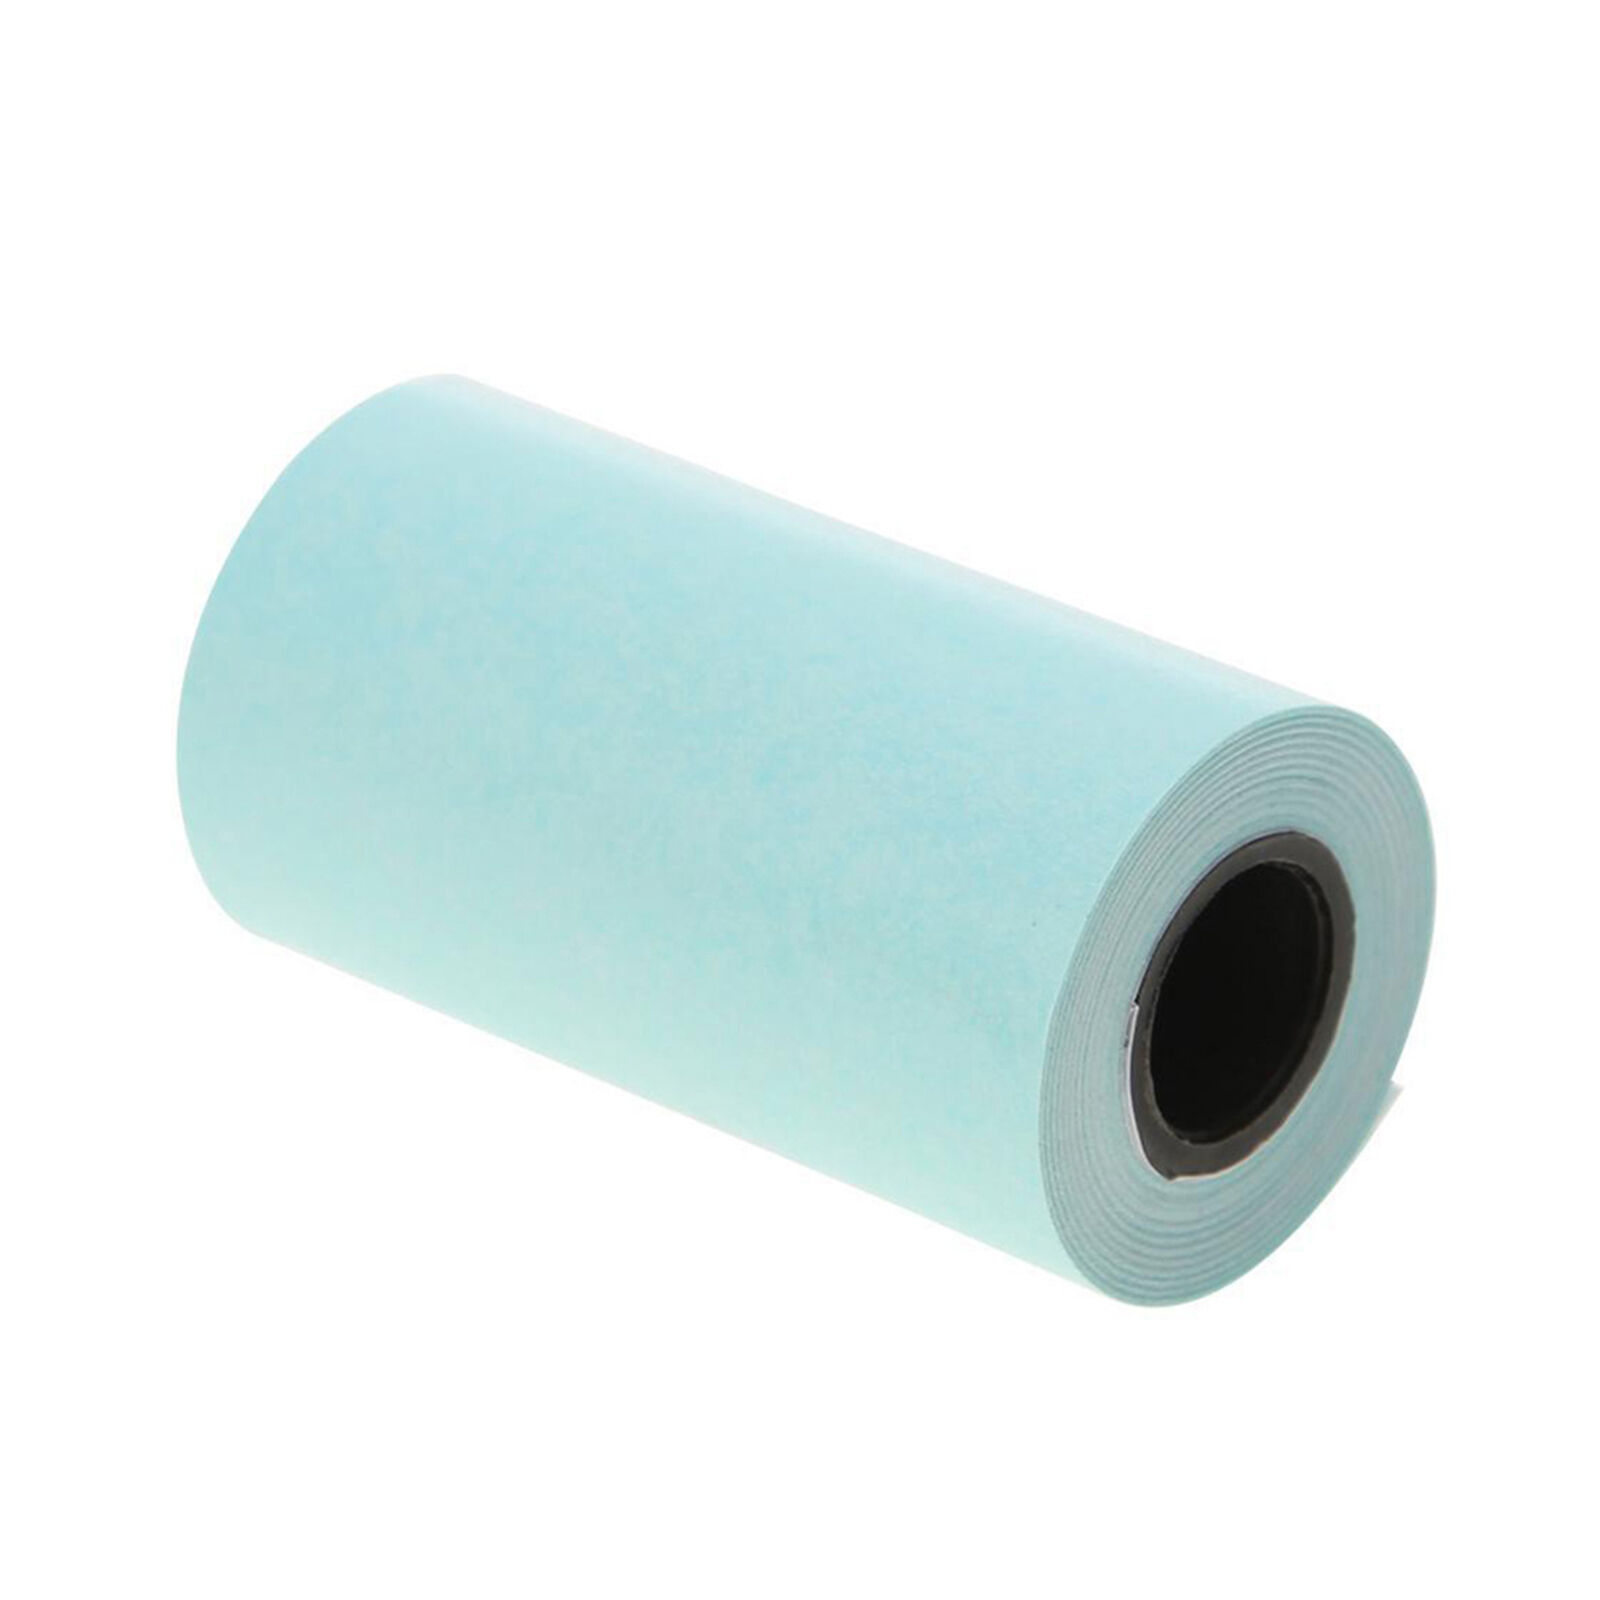 Thermal Tape Clear Image Wear-resistant Thermal Printing Sticker Adhesive Paper